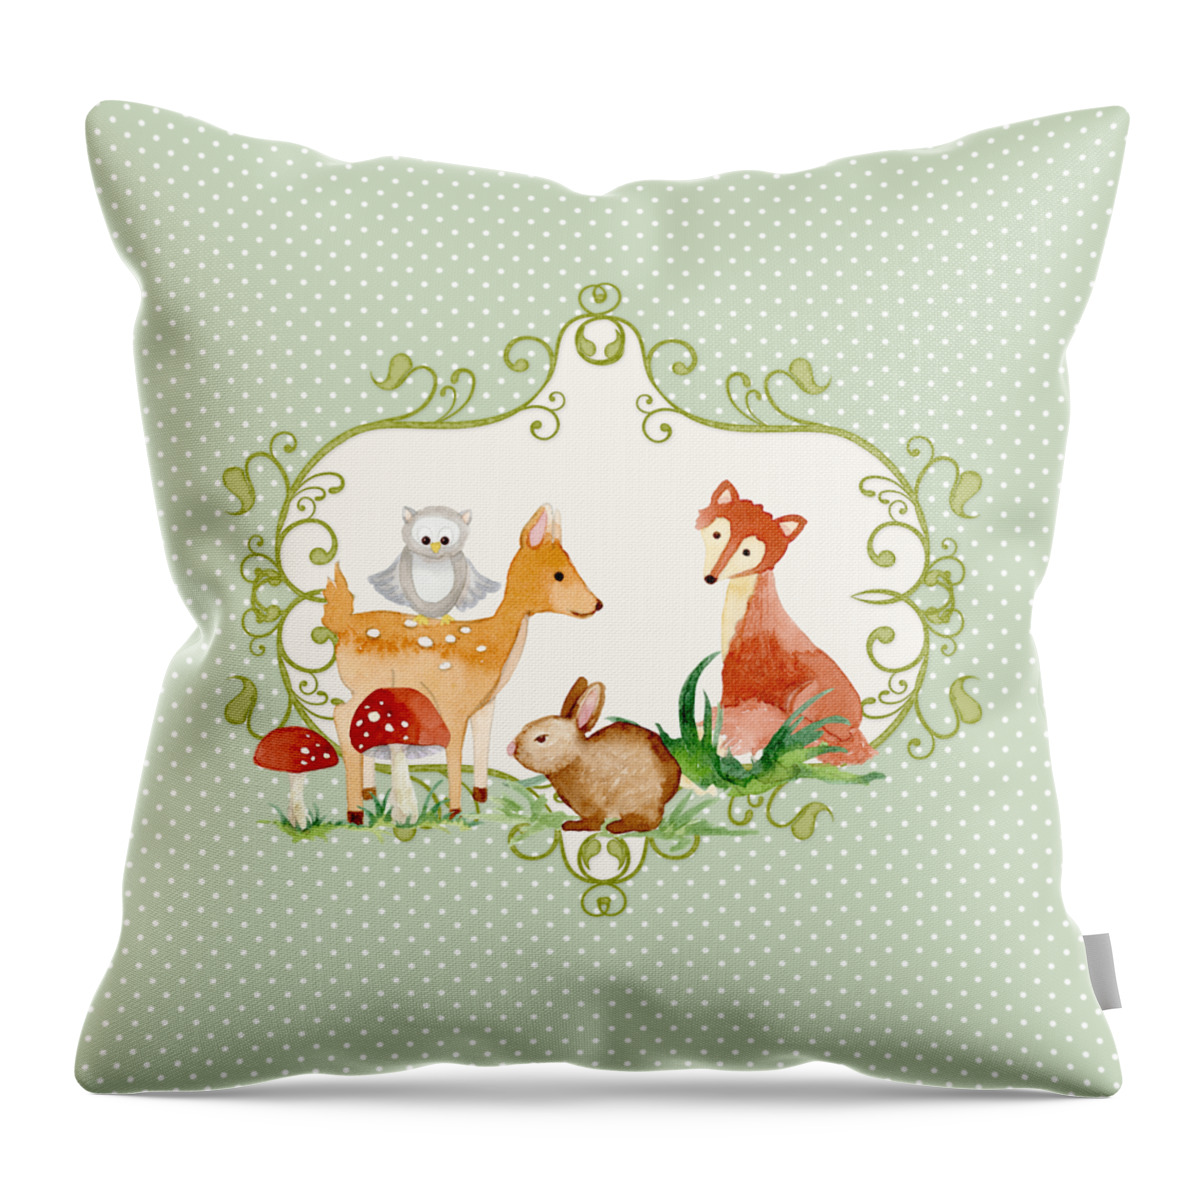 Woodland Throw Pillow featuring the painting Woodland Fairytale - Animals Deer Owl Fox Bunny N Mushrooms #1 by Audrey Jeanne Roberts